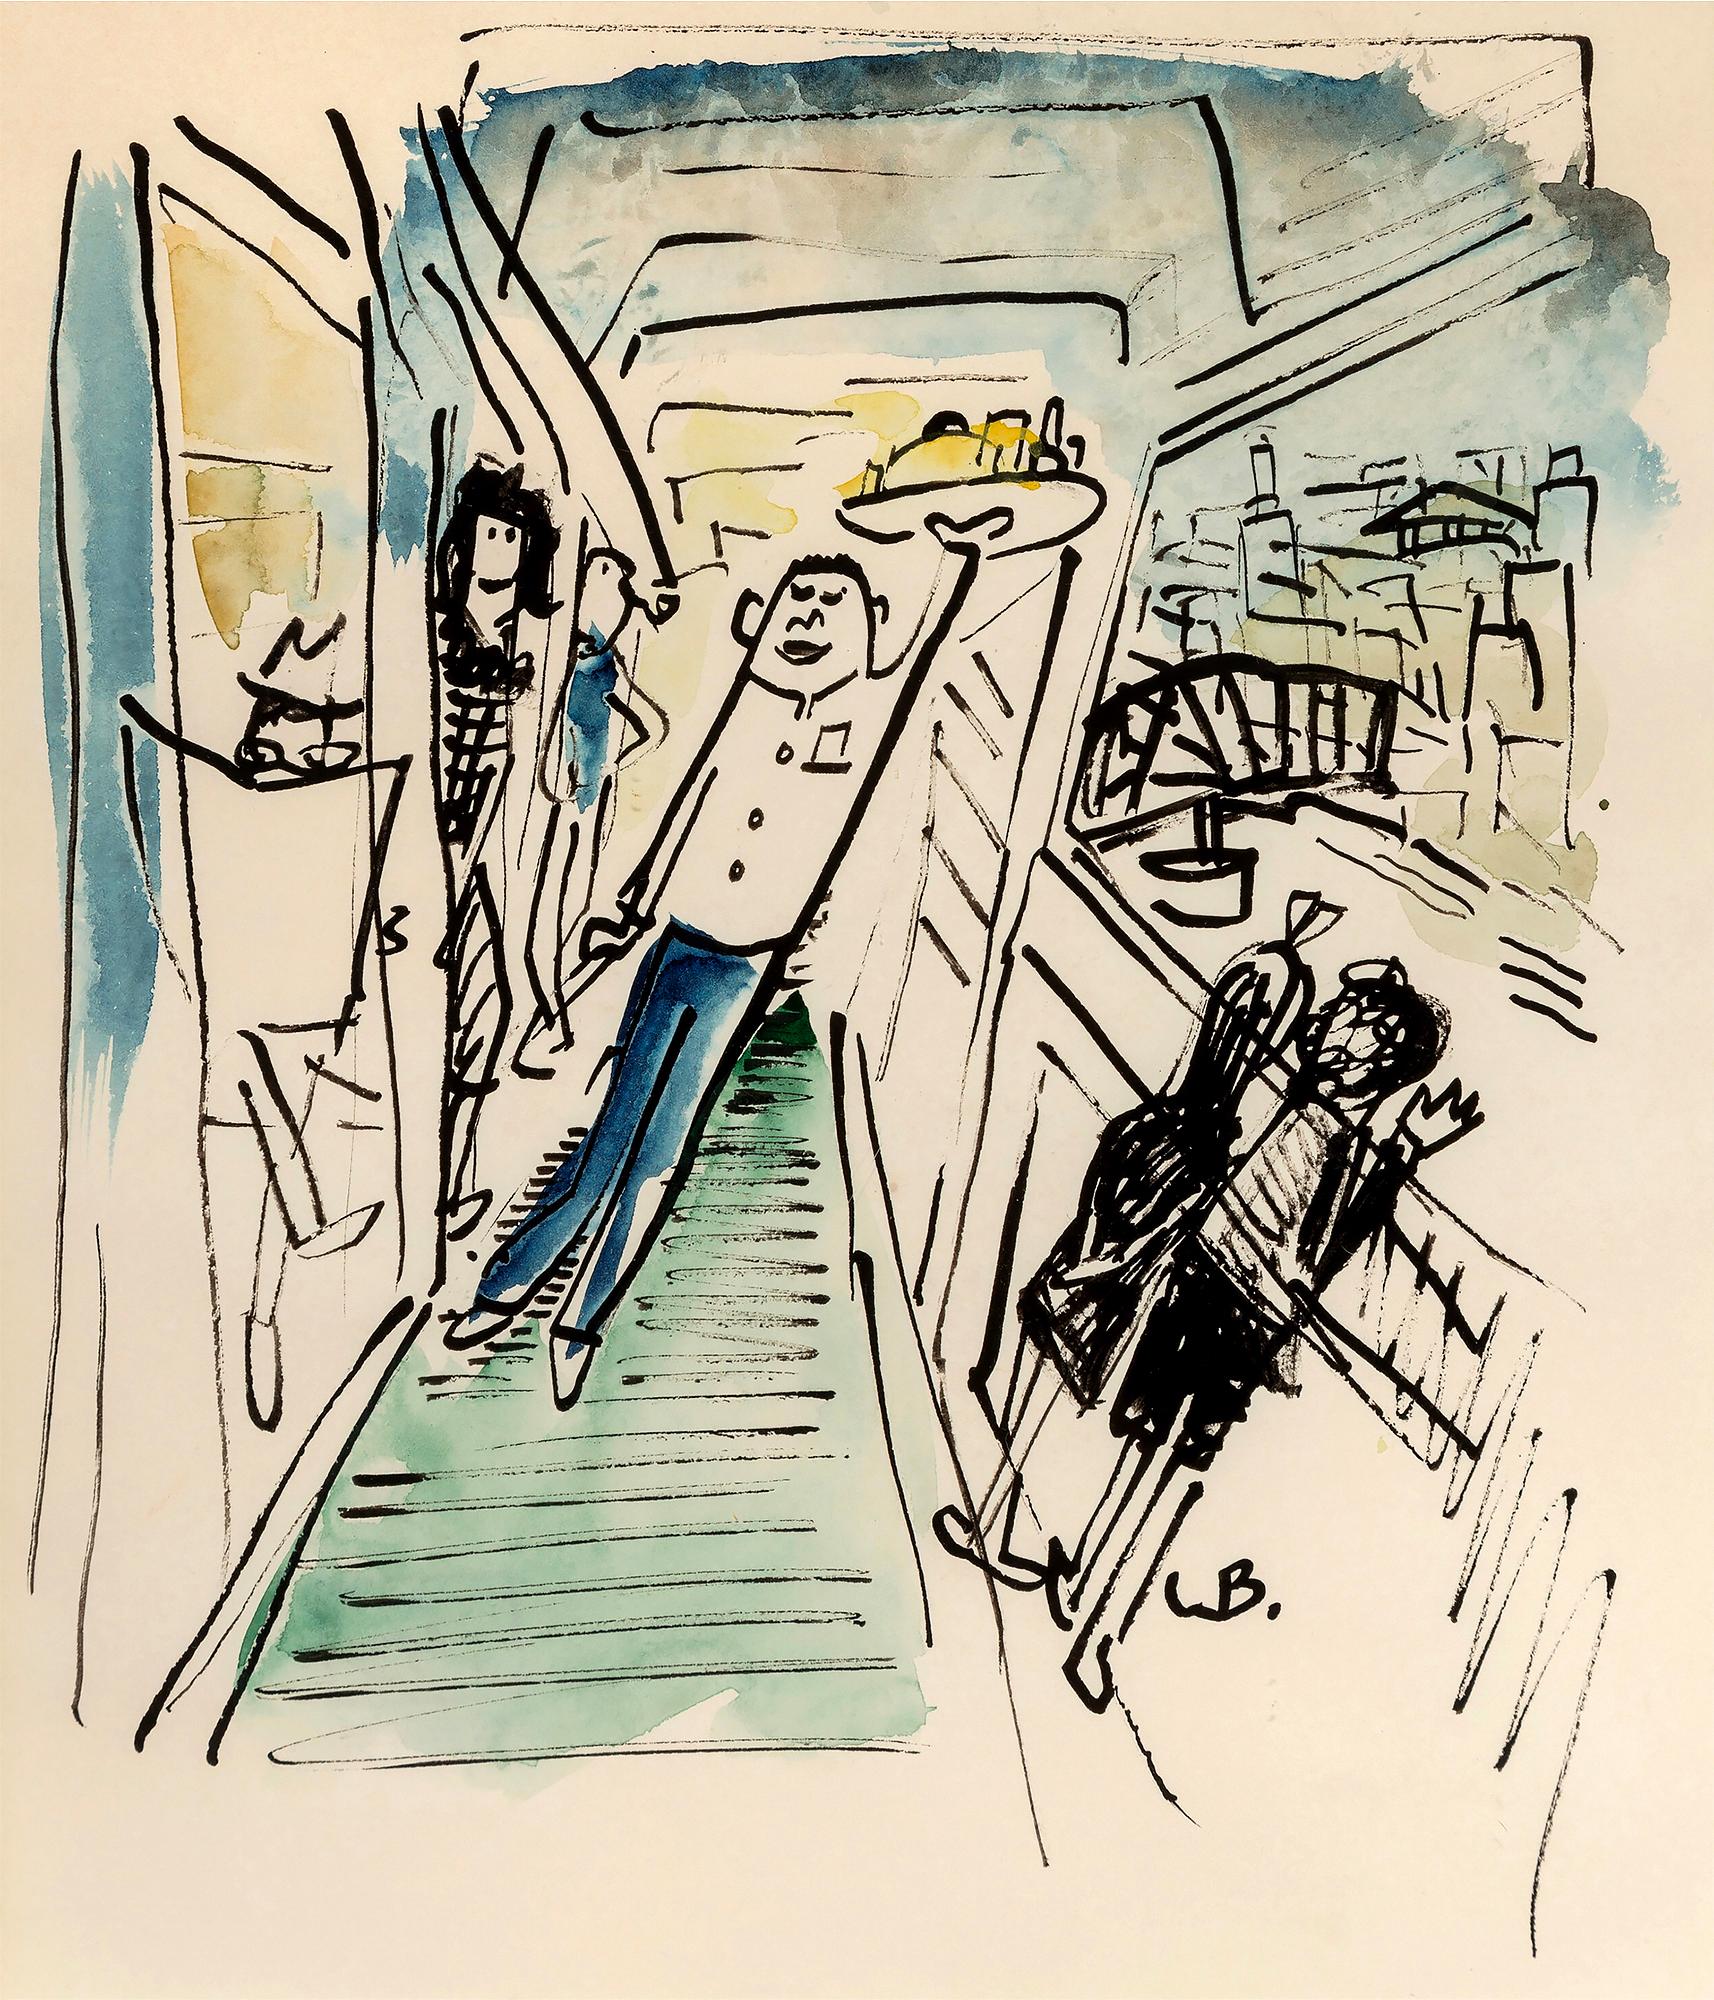 Ludwig Bemelmans Portrait - Waiter Dancing and Strutting on a Ship, Possible Madeline sighting